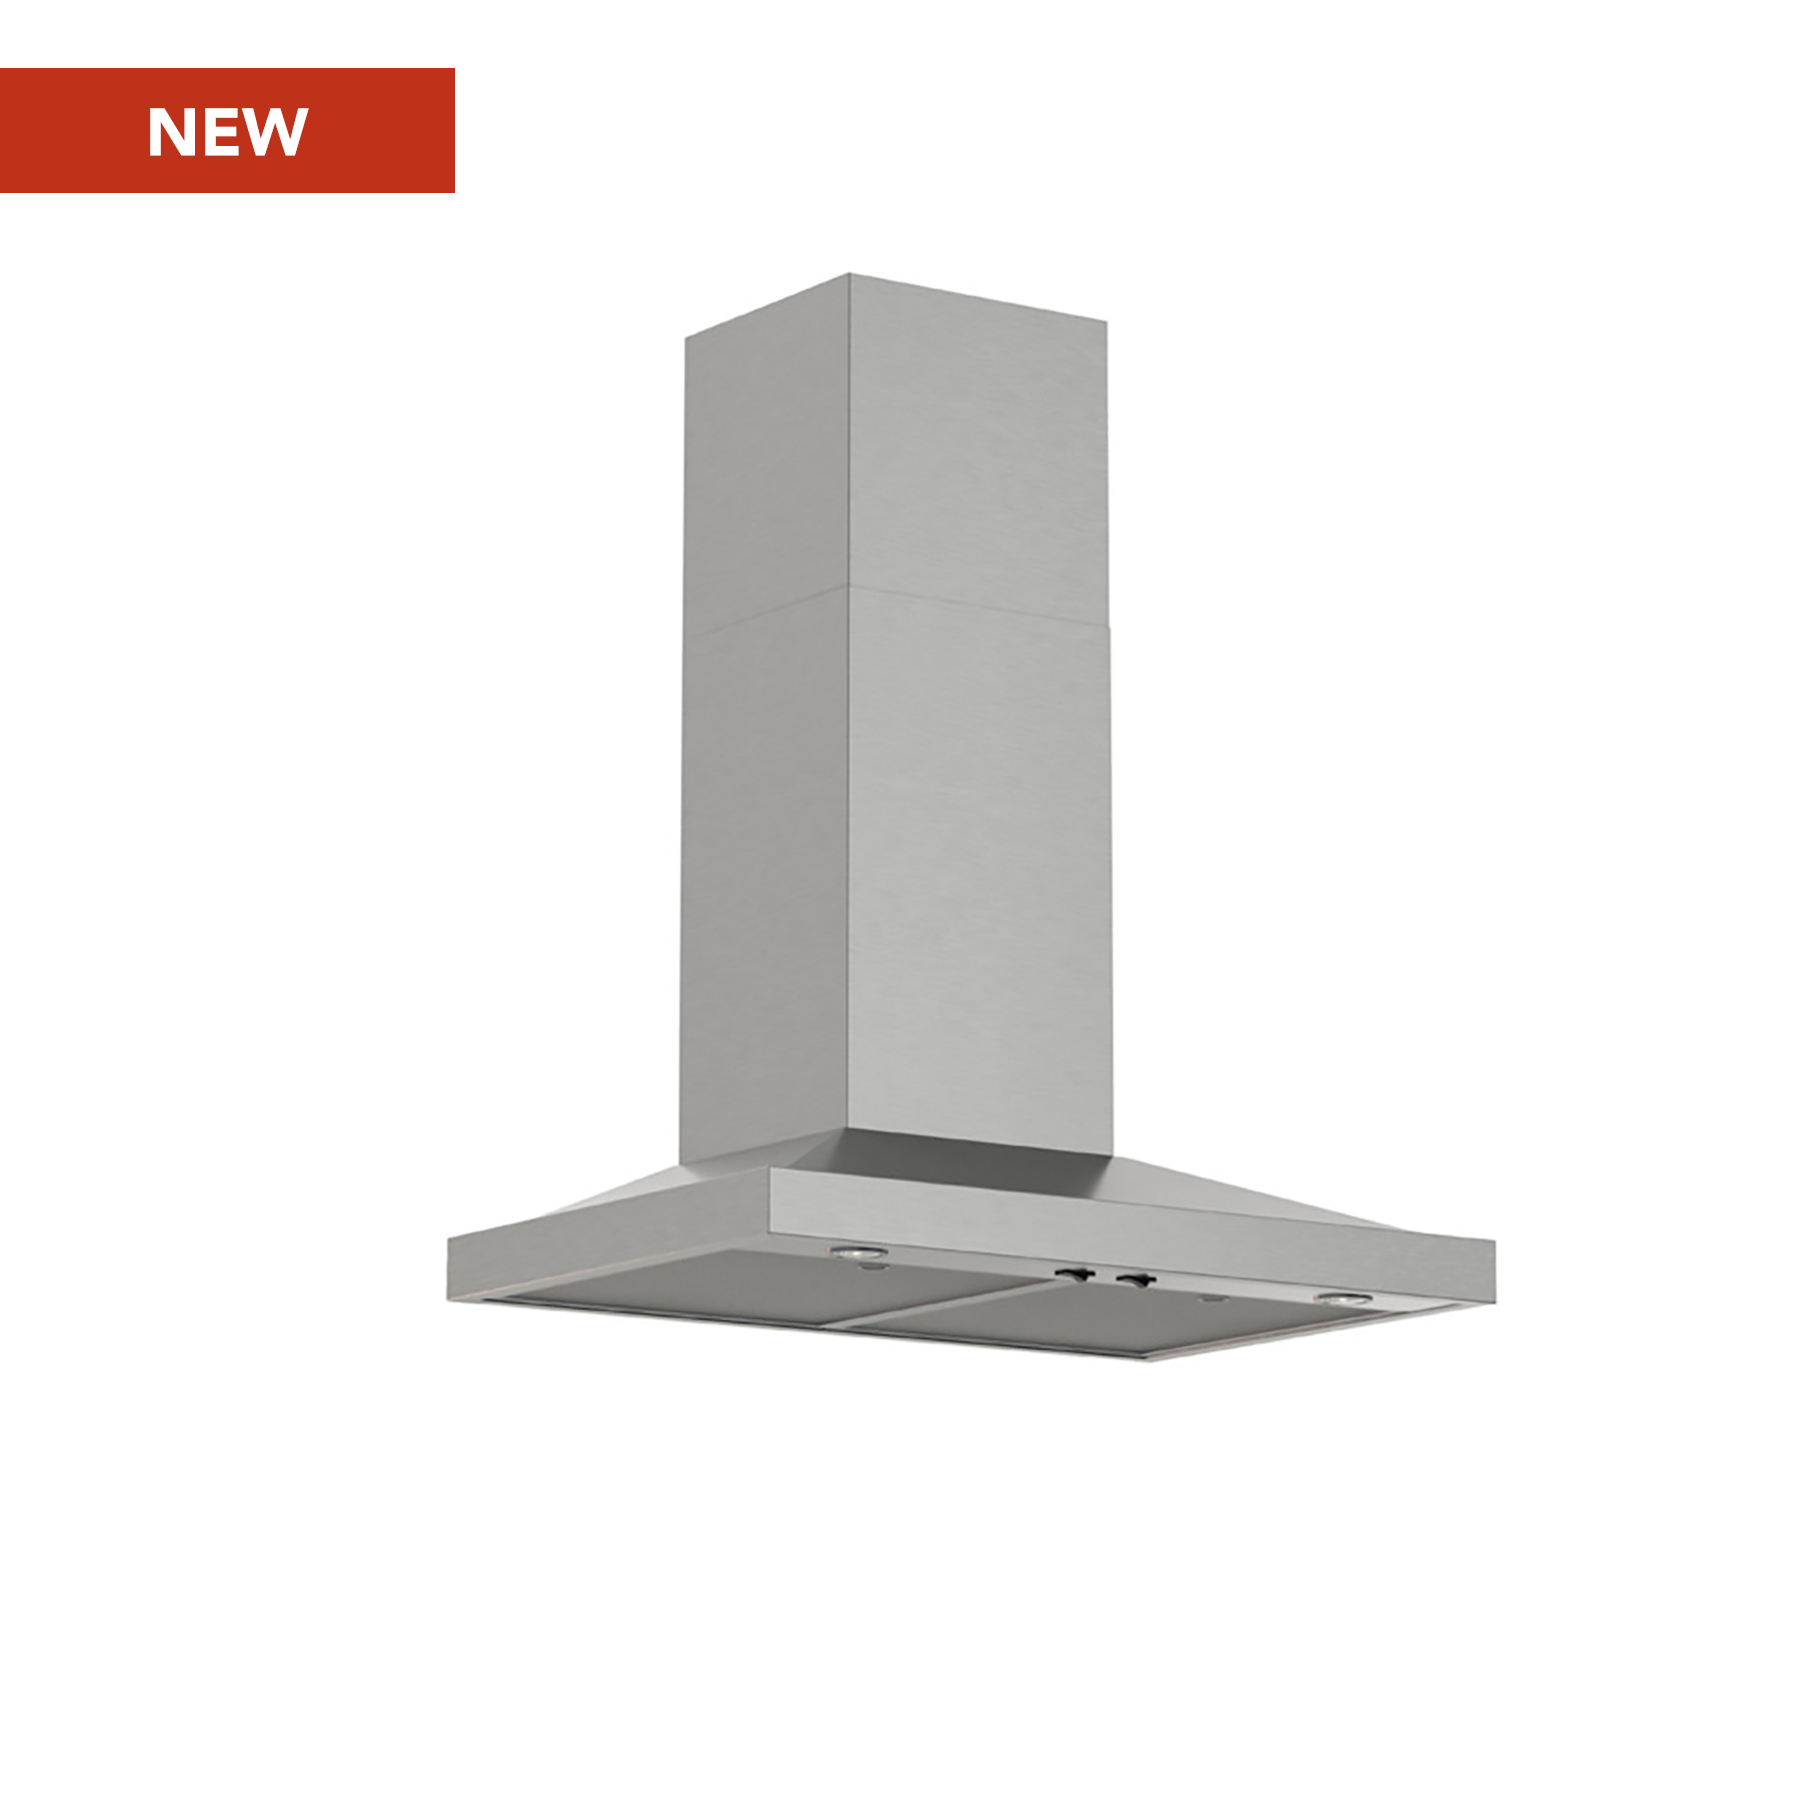 Broan® 30-inch Pyramid Chimney Range Hood with Code Ready™ Technology, 650 Max Blower CFM, Stainless Steel